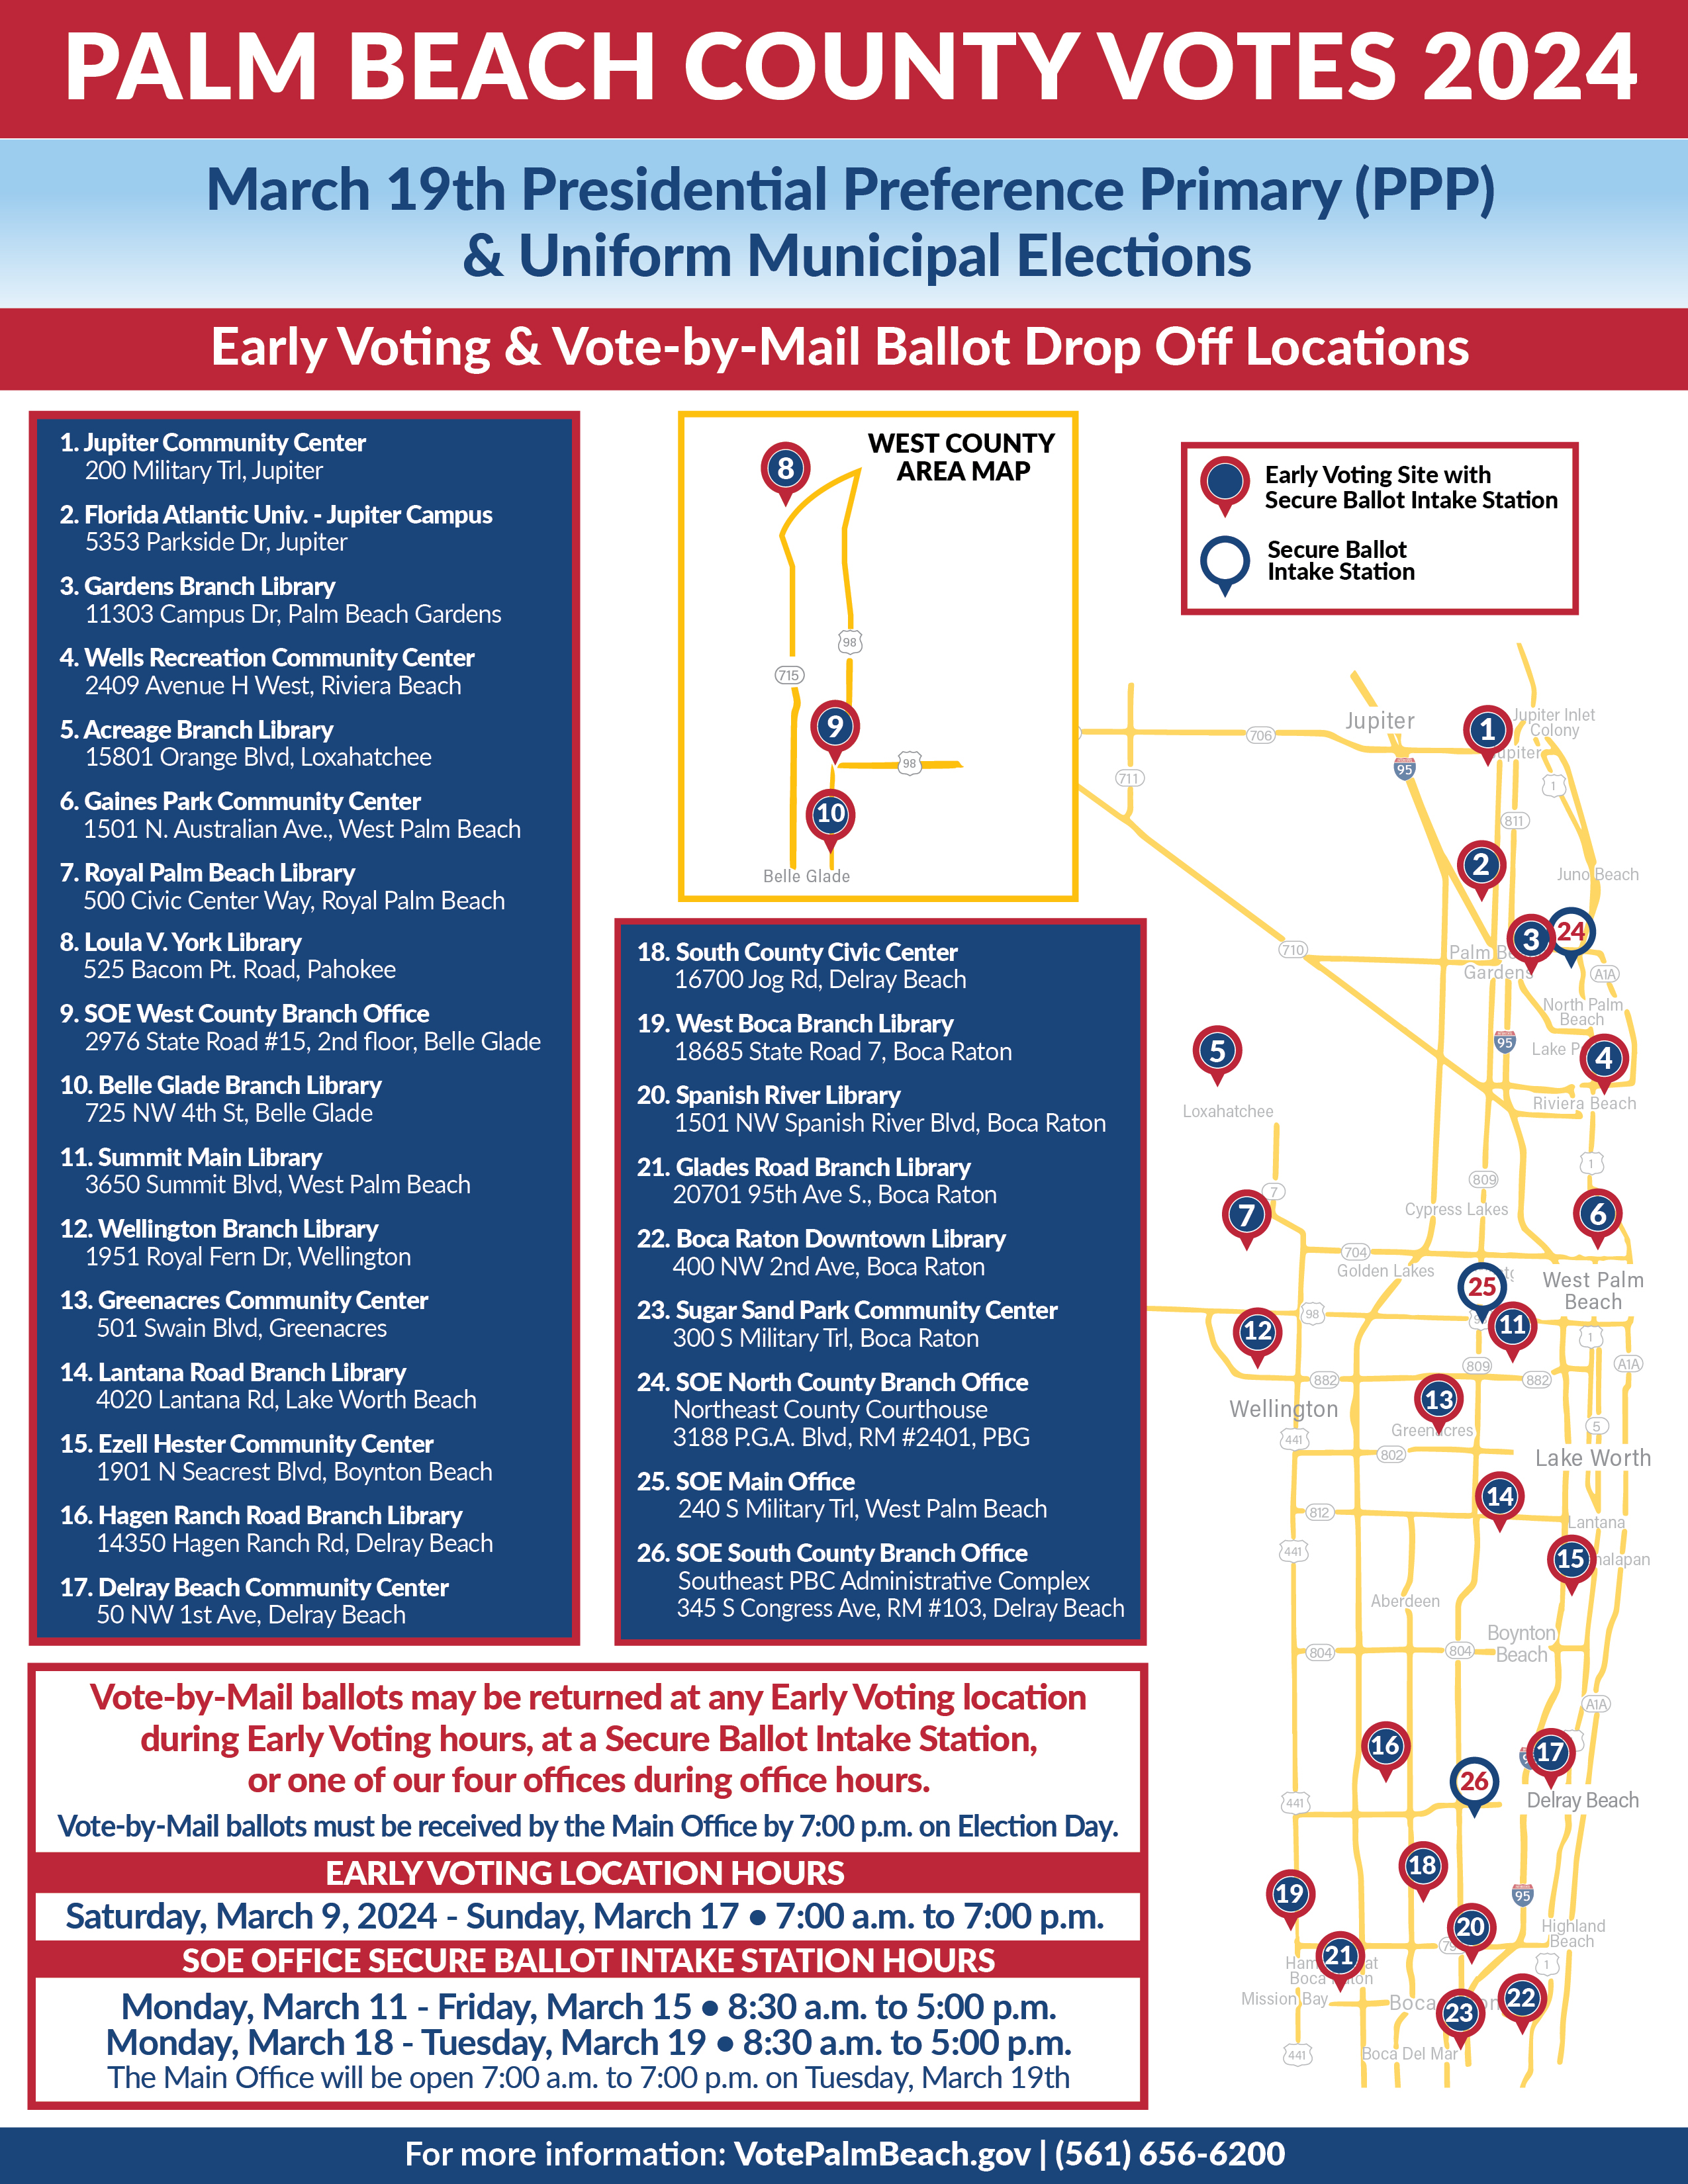 Click this image for a printable PDF flyer of the map